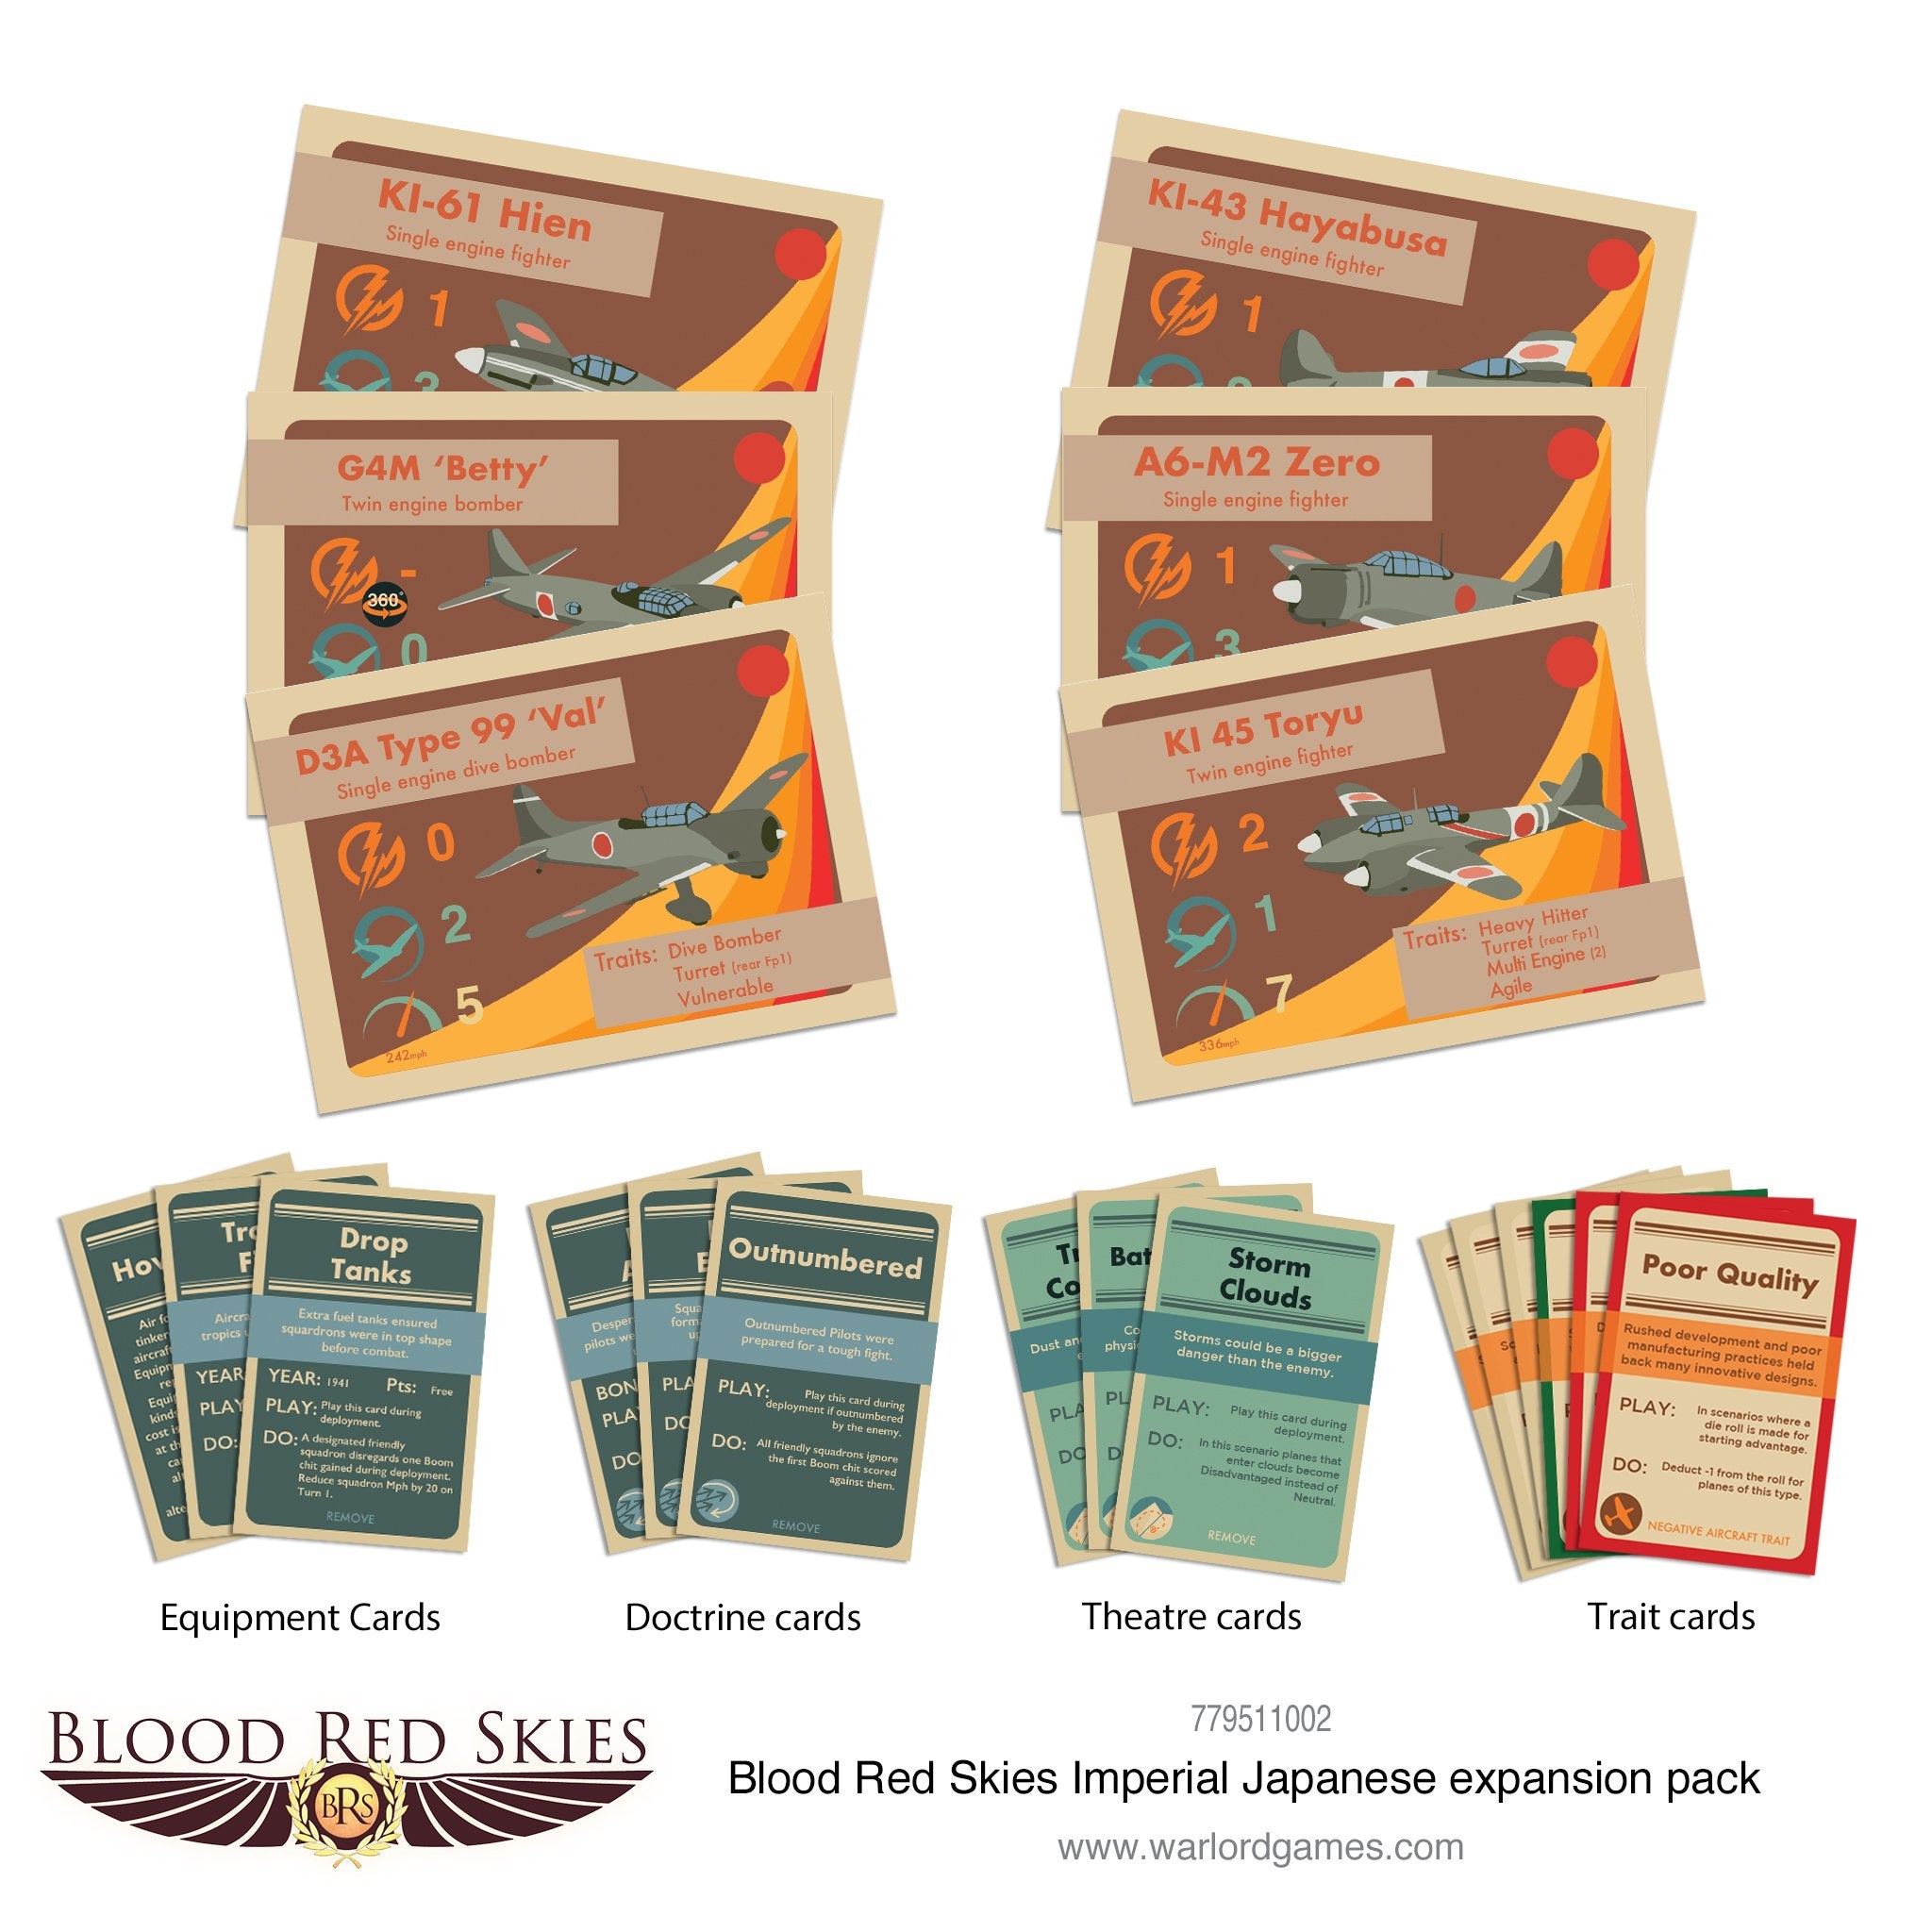 Blood Red Skies Imperial Japanese expansion pack